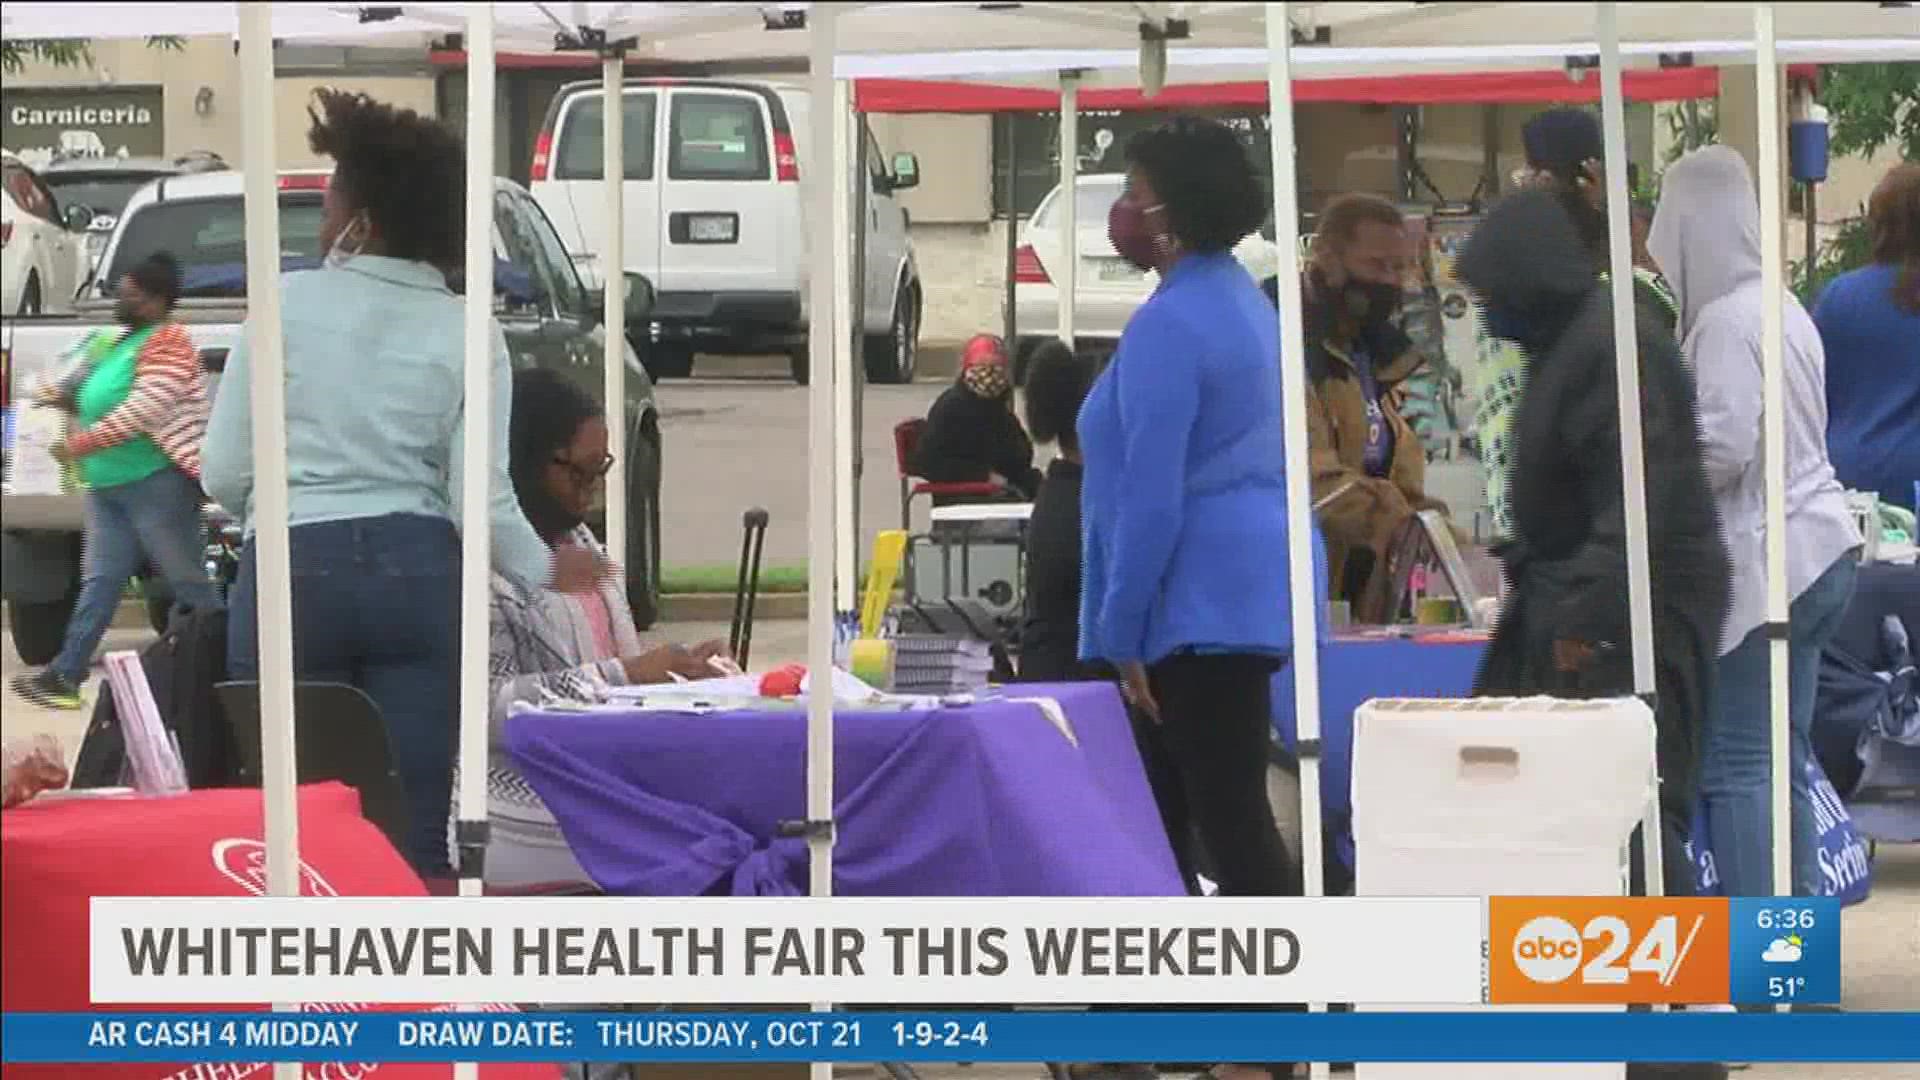 Methodist South will offer a free drive-thru health fair on Saturday from 9 a.m. to noon